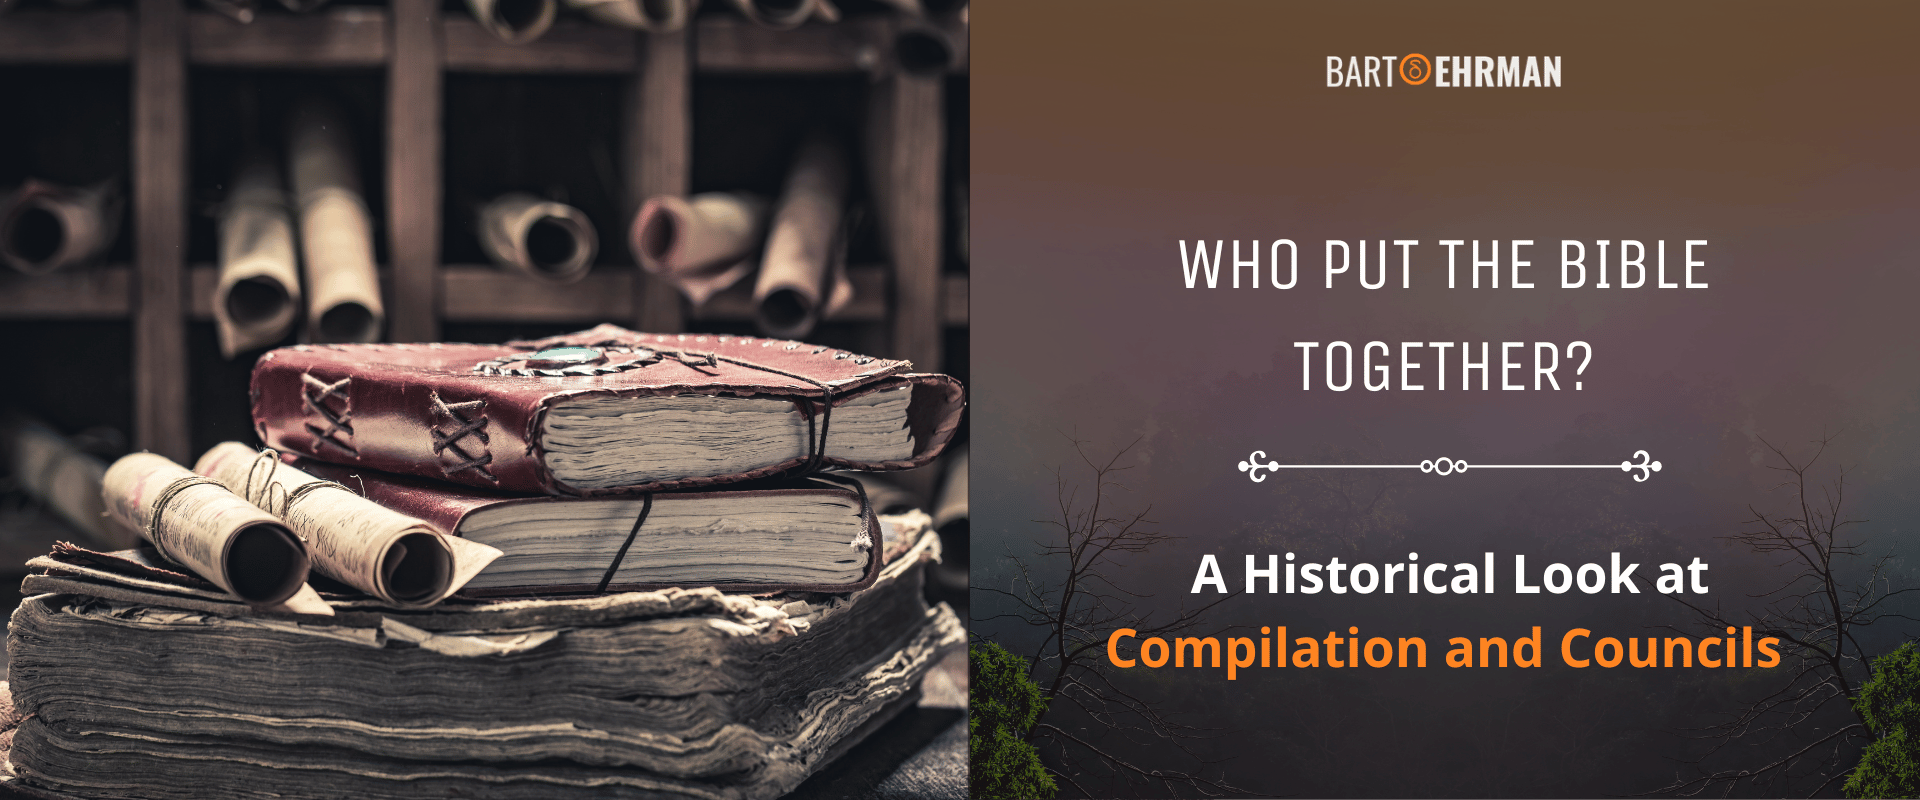 Who Put the Bible Together - A Historical Look at Complilation and Councils